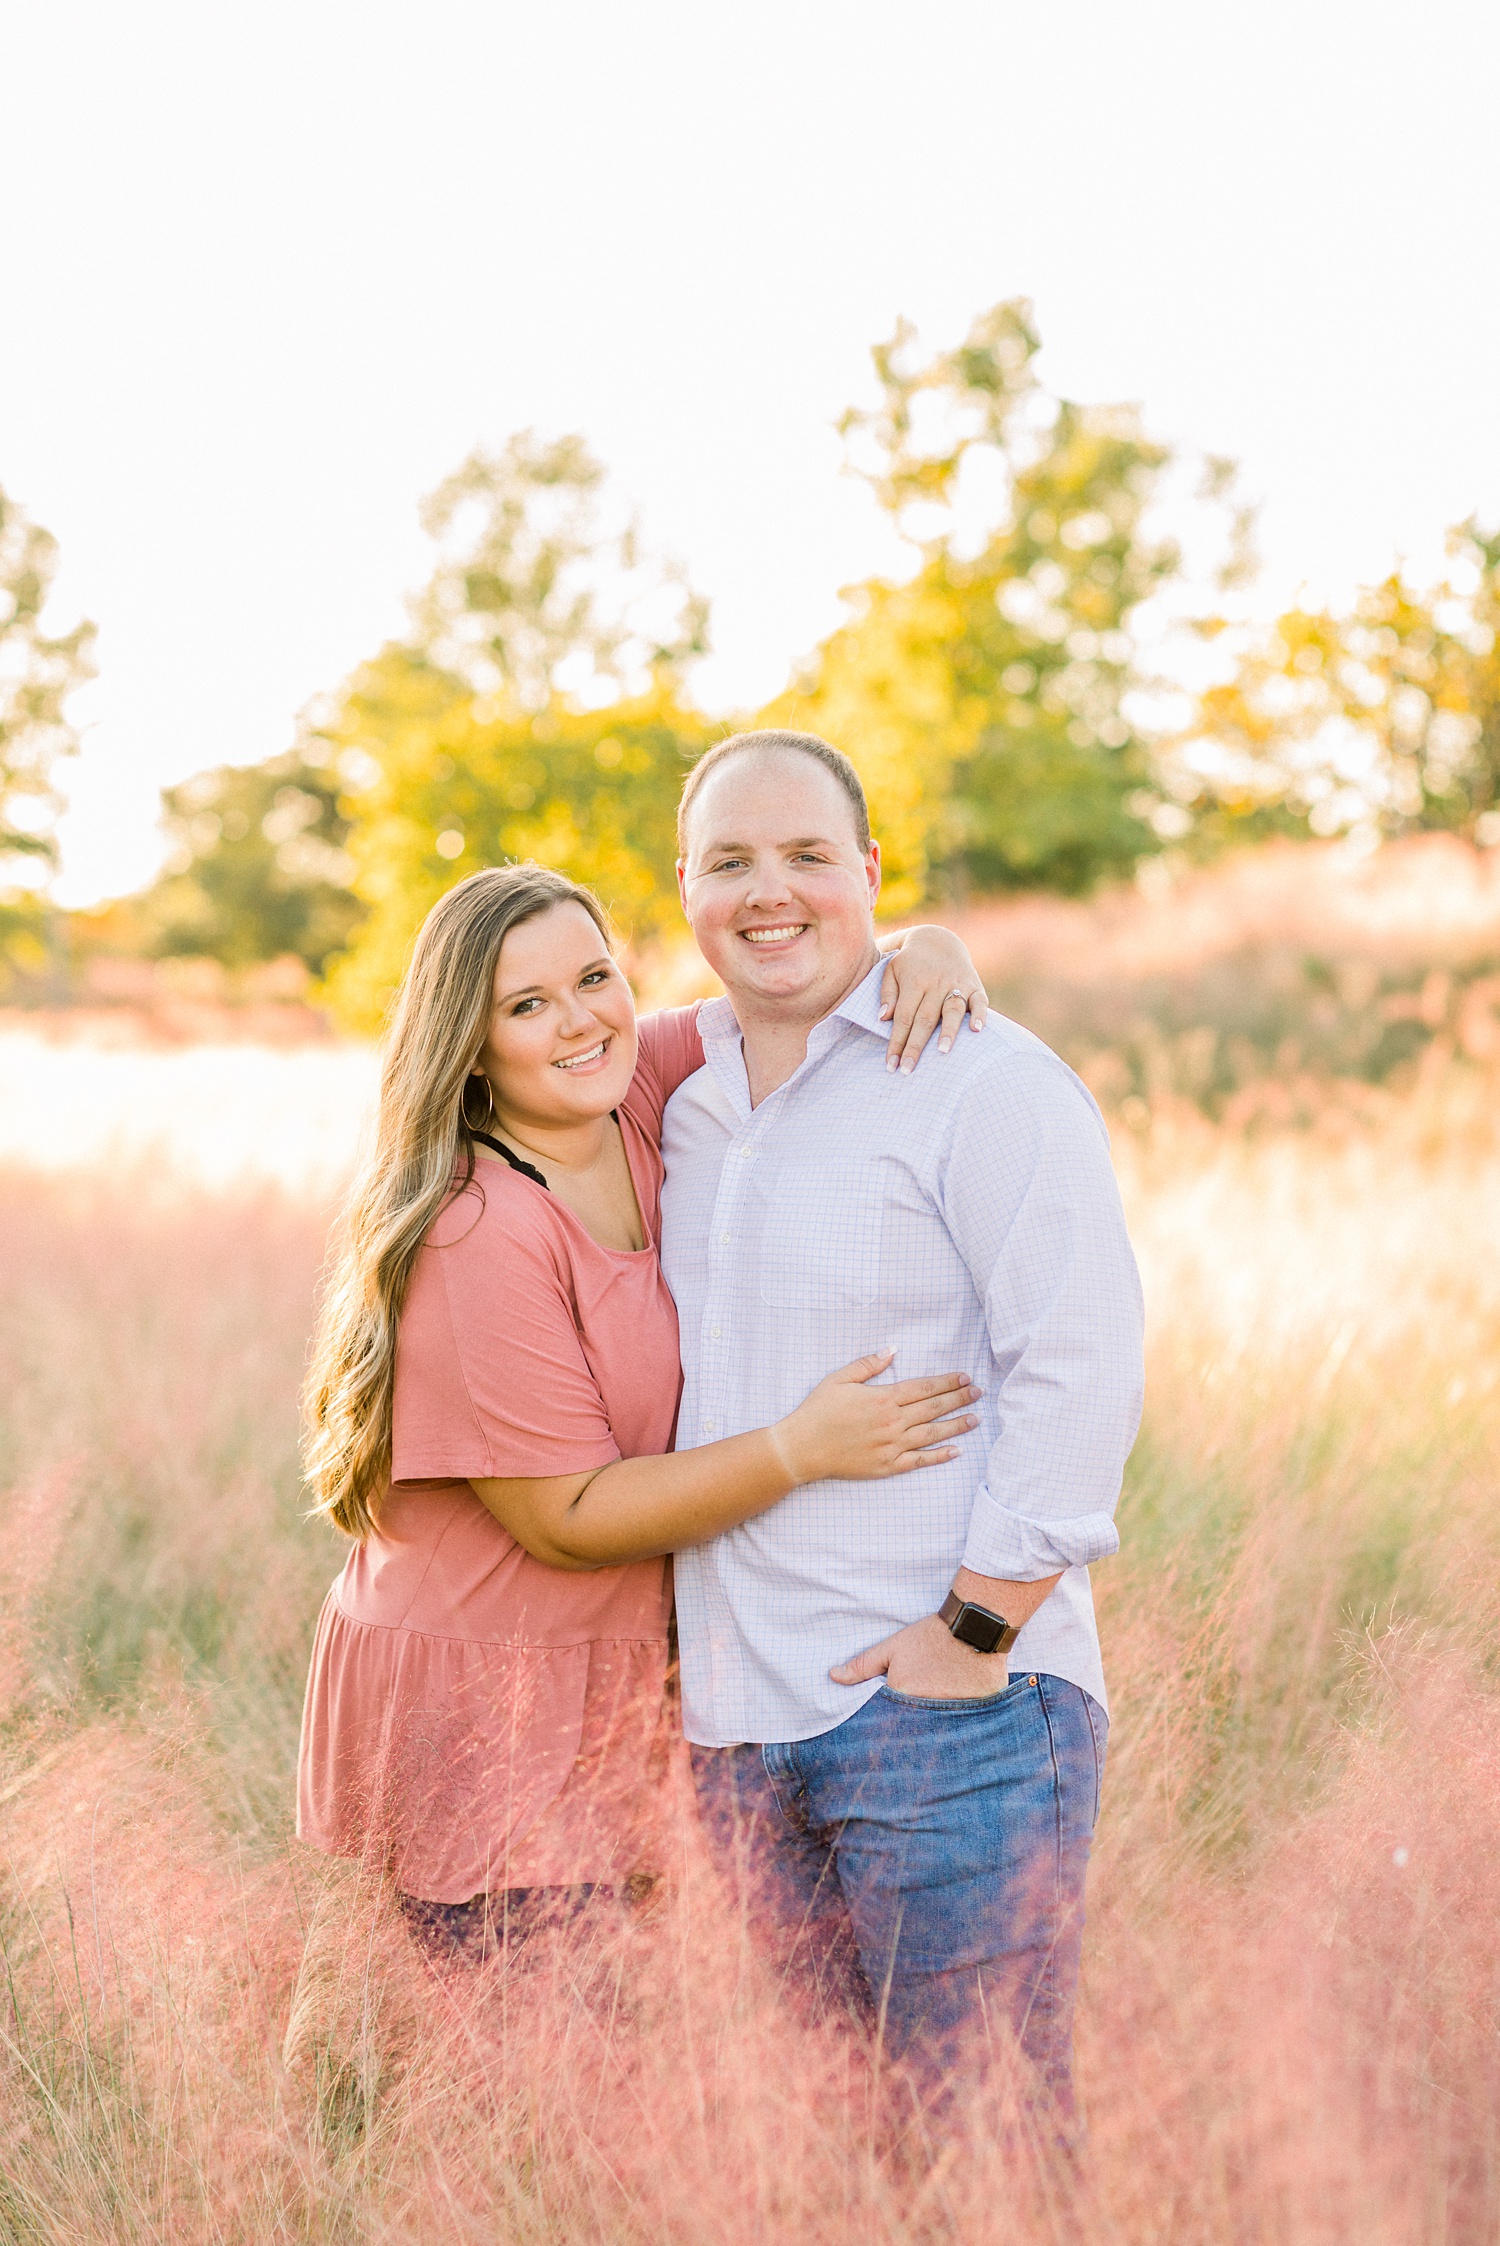 fall engagement portraits at sunset in field